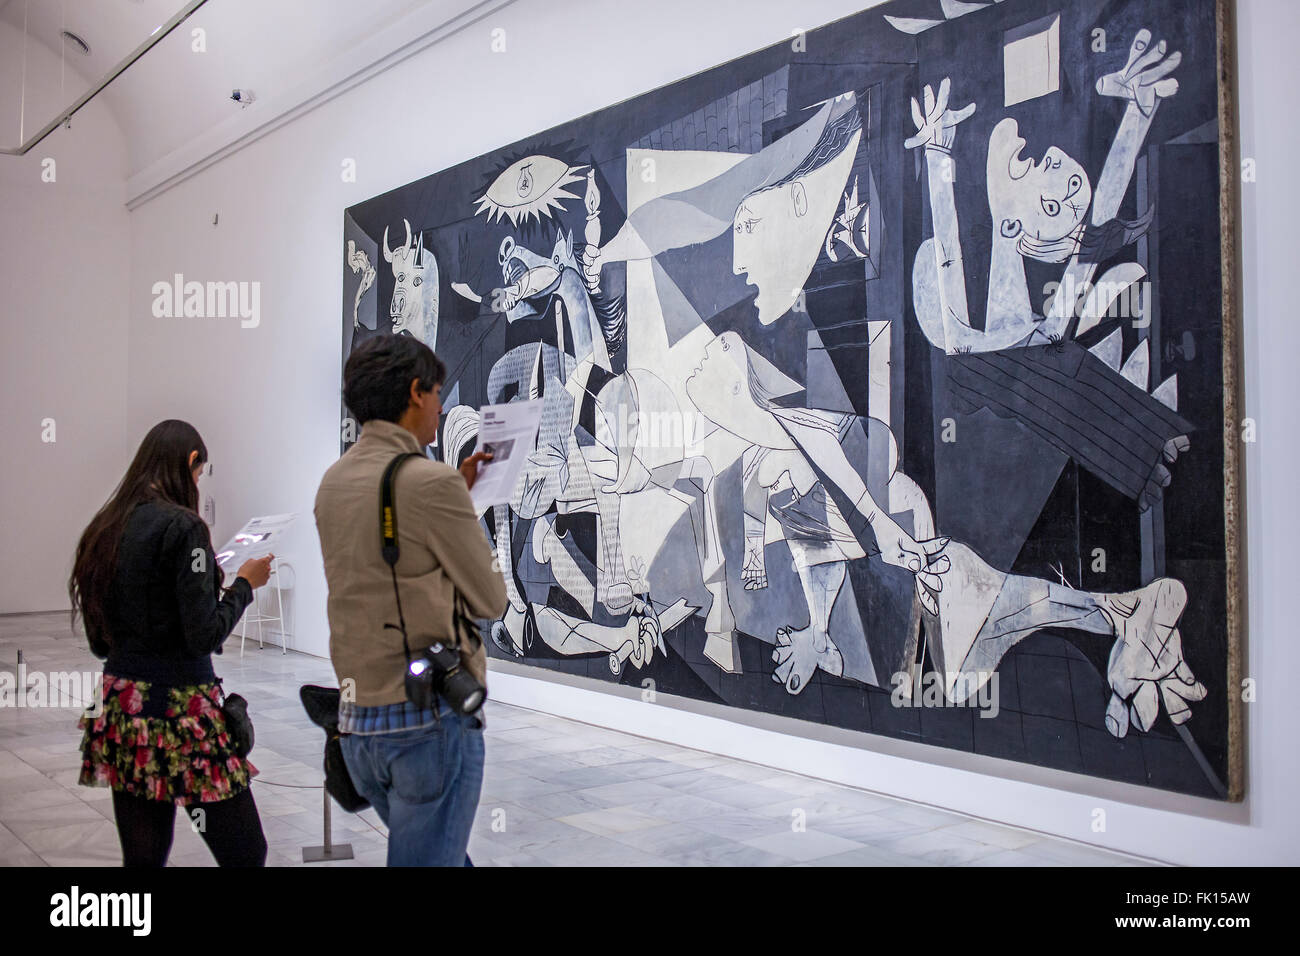 The 'Guernica' painting by Picasso, Reina Sofia National Art Museum, Madrid, Spain. Stock Photo